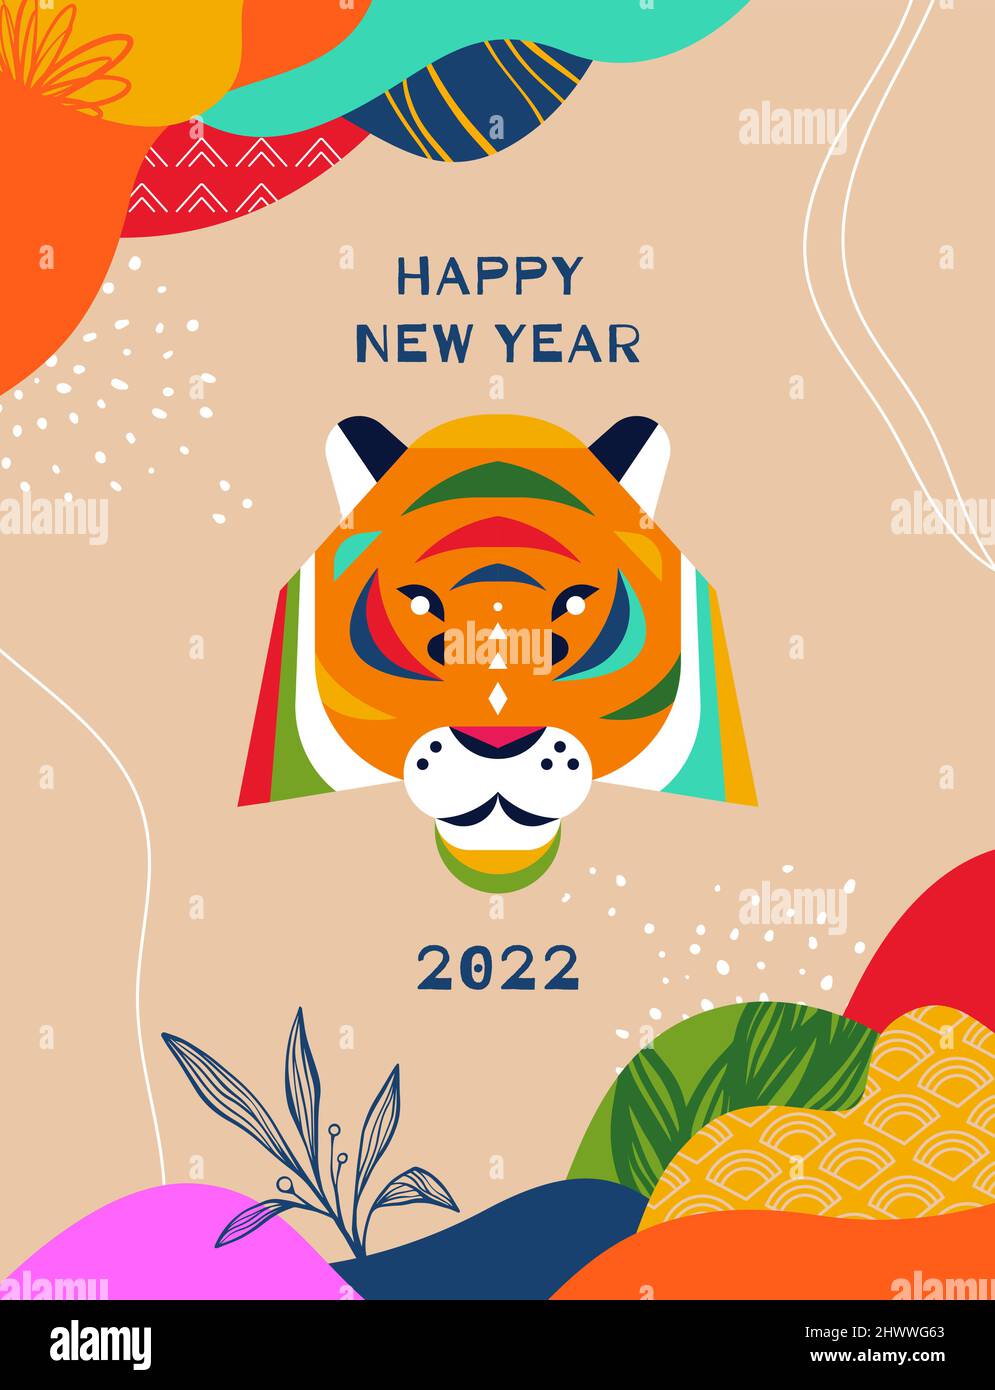 Happy Chinese New Year 2022 greeting card illustration of geometric tiger animal head with colorful abstract nature decoration and folk art symbol. Fe Stock Vector